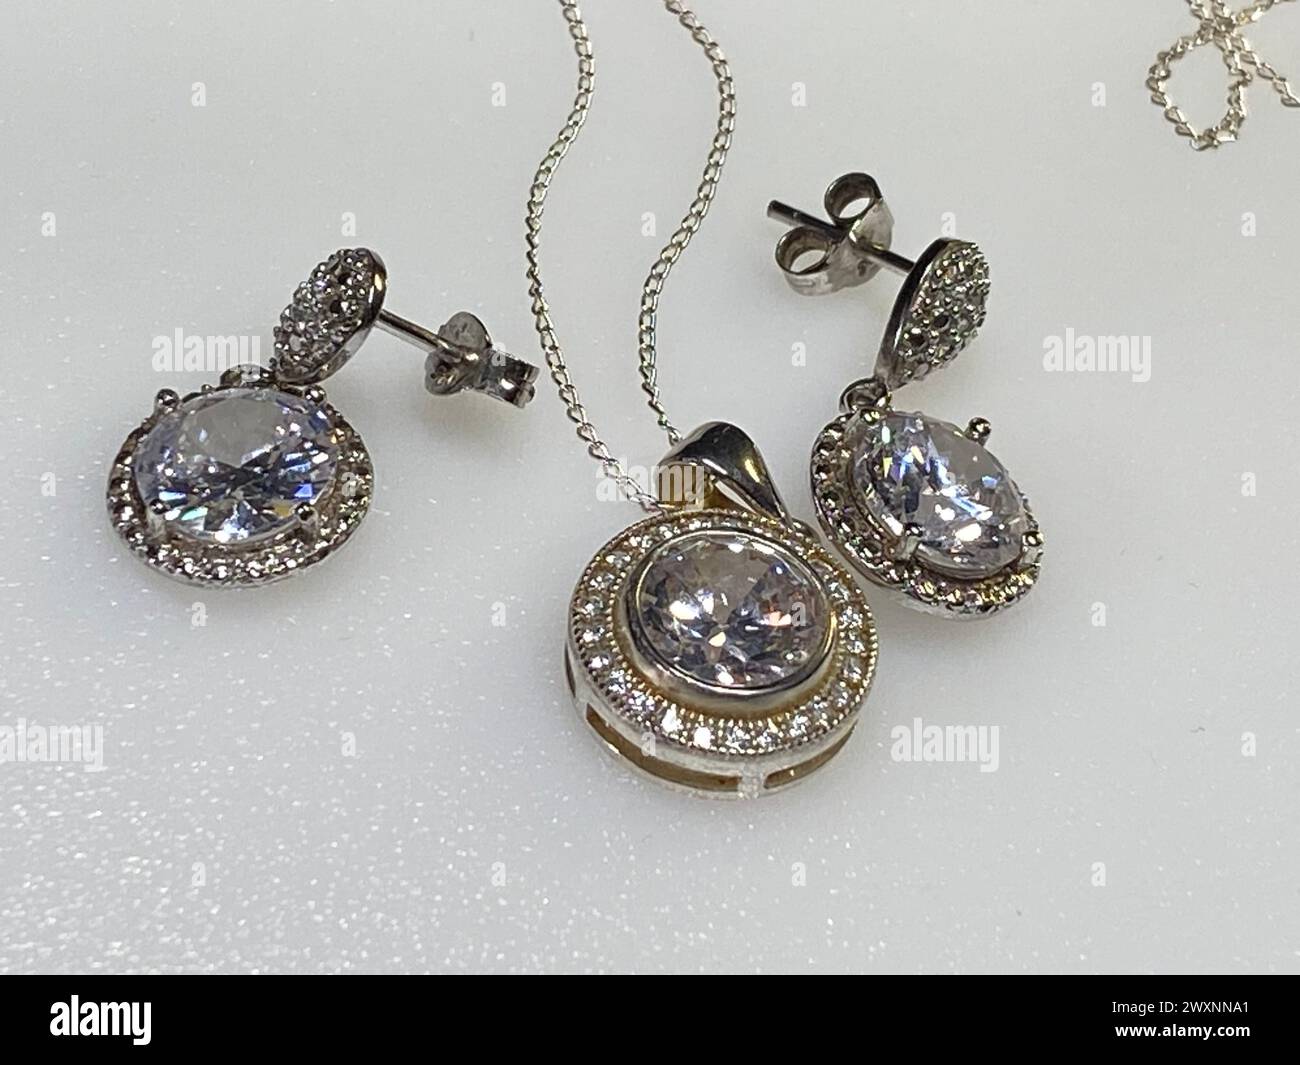 A silver necklace and earring adorned with small diamonds Stock Photo